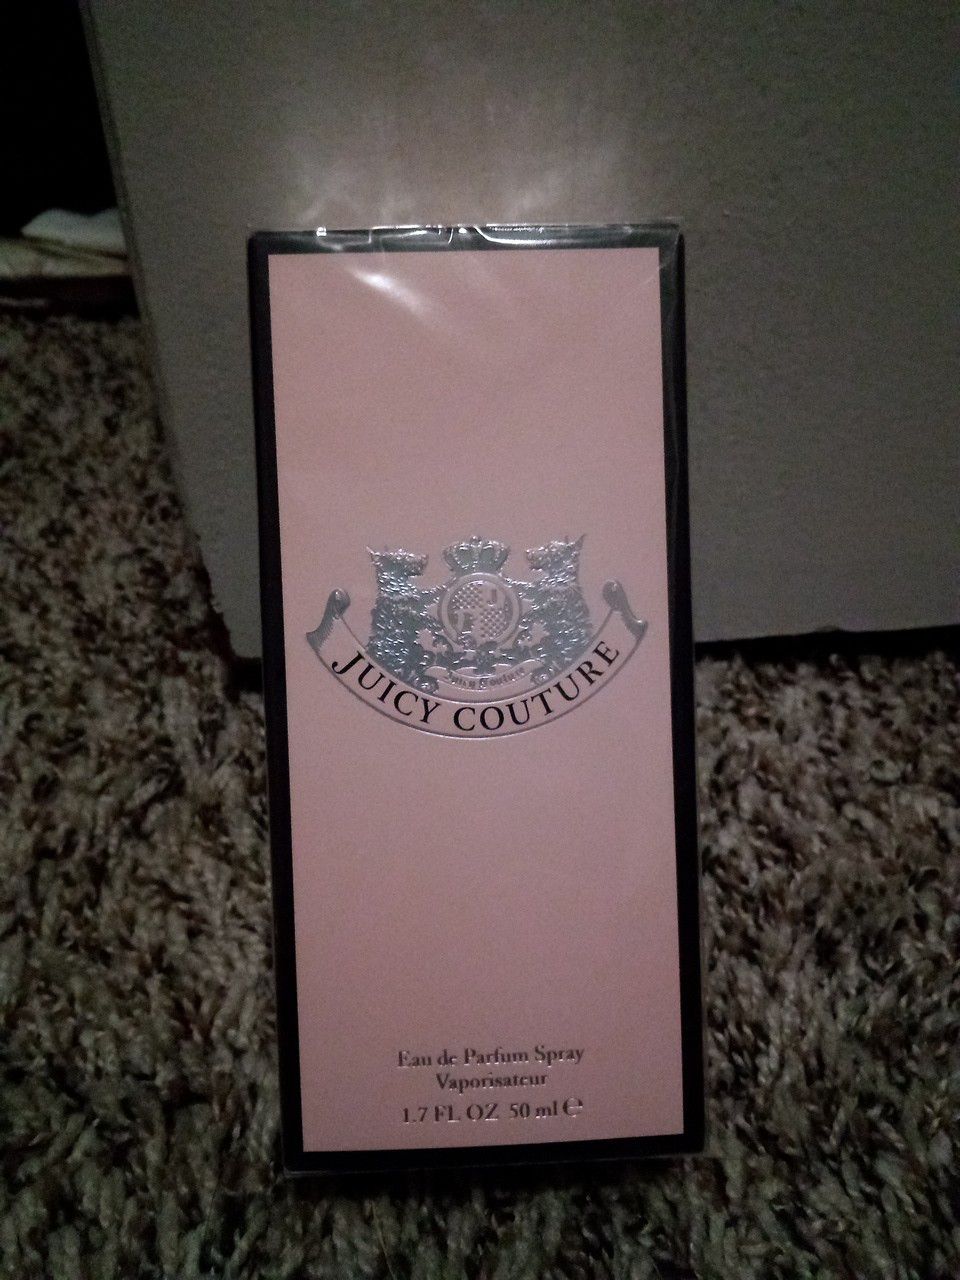 New Juicy Couture perfume 1.7 FL OZ